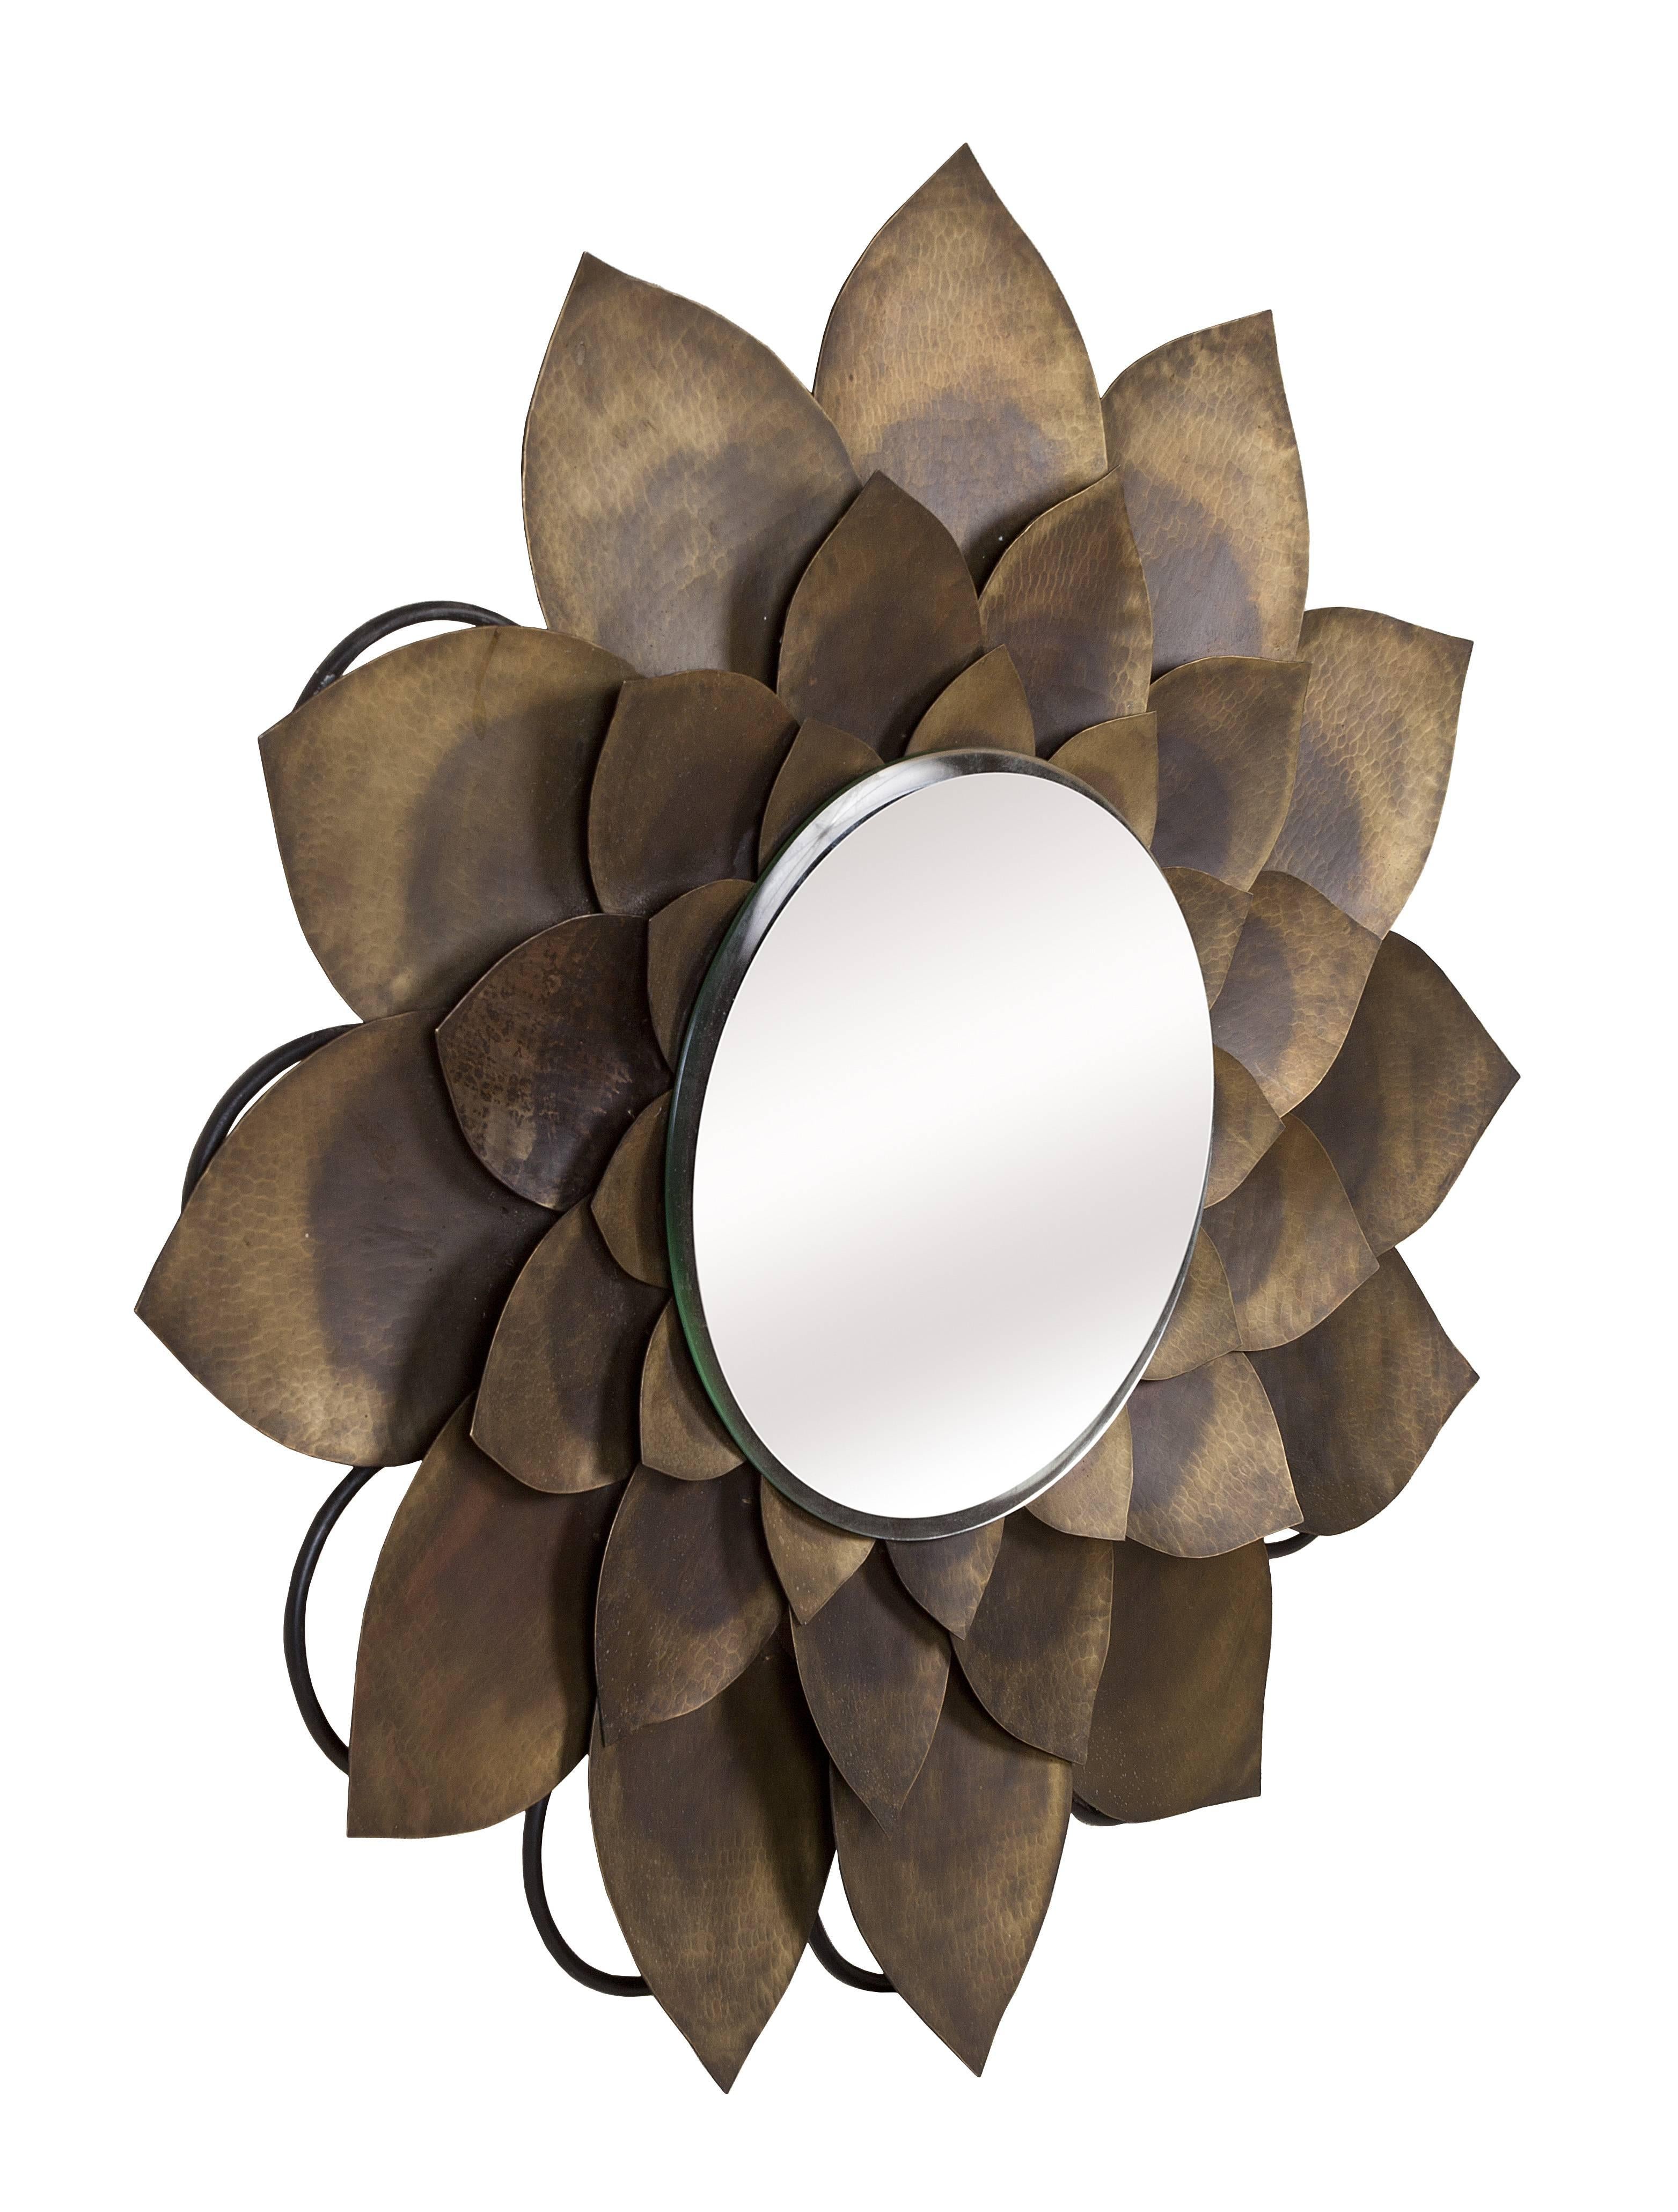 Such a cool and rare find. This hand-hammered lotus flower mirror with beveled glass dates to the 1960s. Wrought iron framework on the backside makes it easy to hang. This is quite special. The mirror glass diameter is 14 inches.